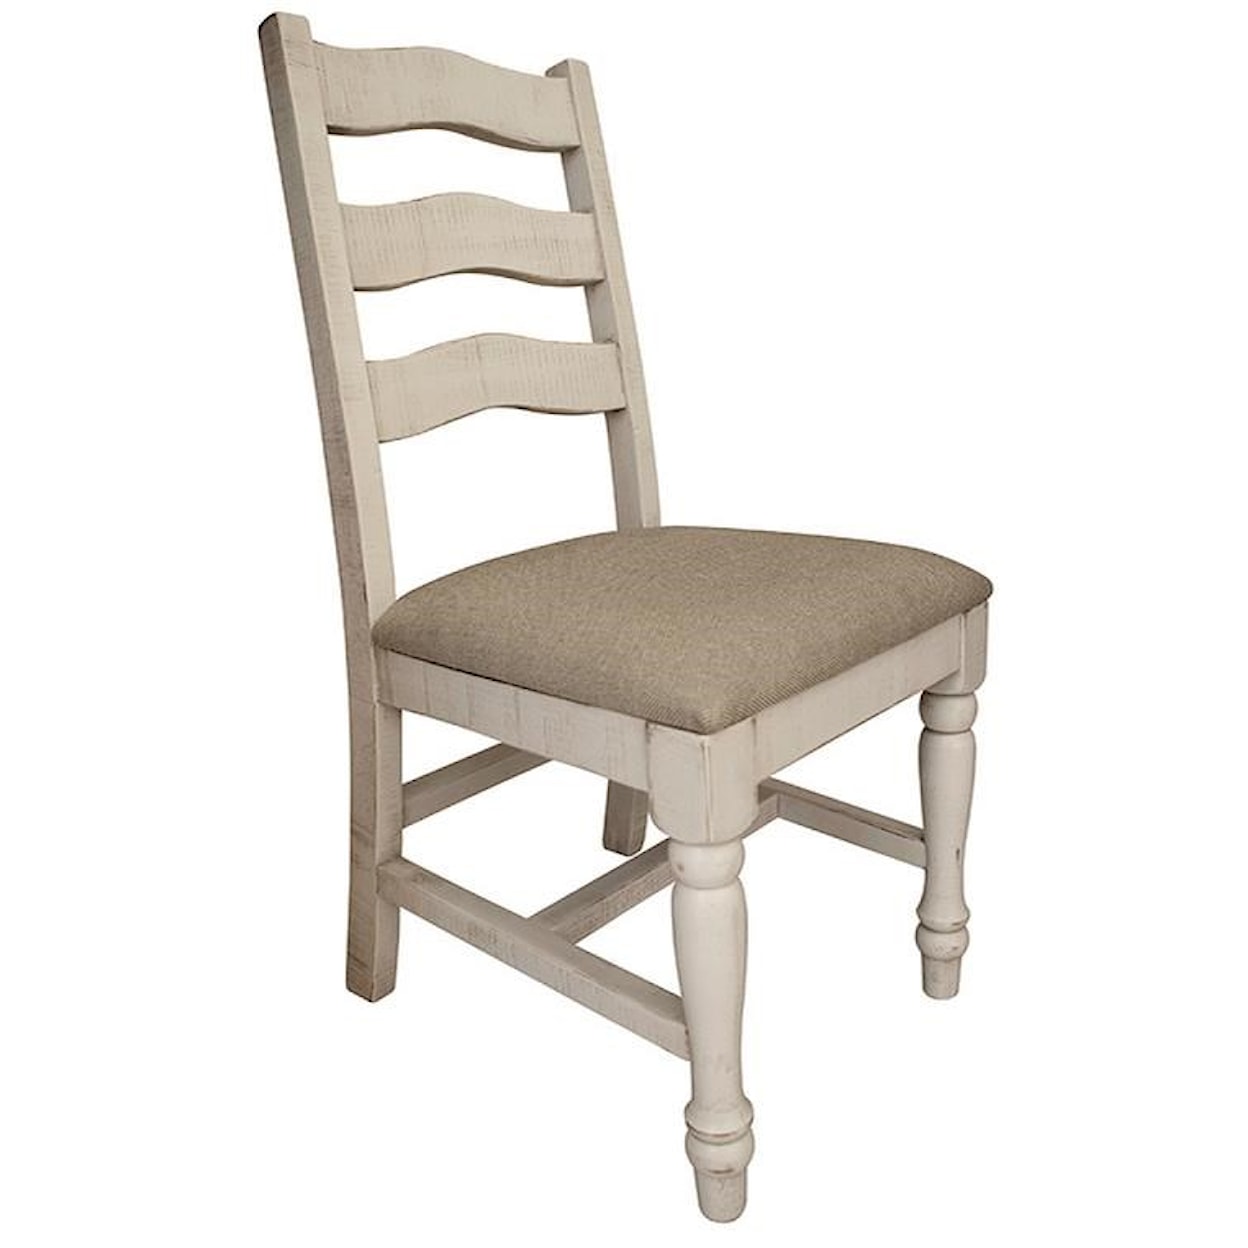 VFM Signature Rock Valley Solid Wood Chair with Fabric Seat